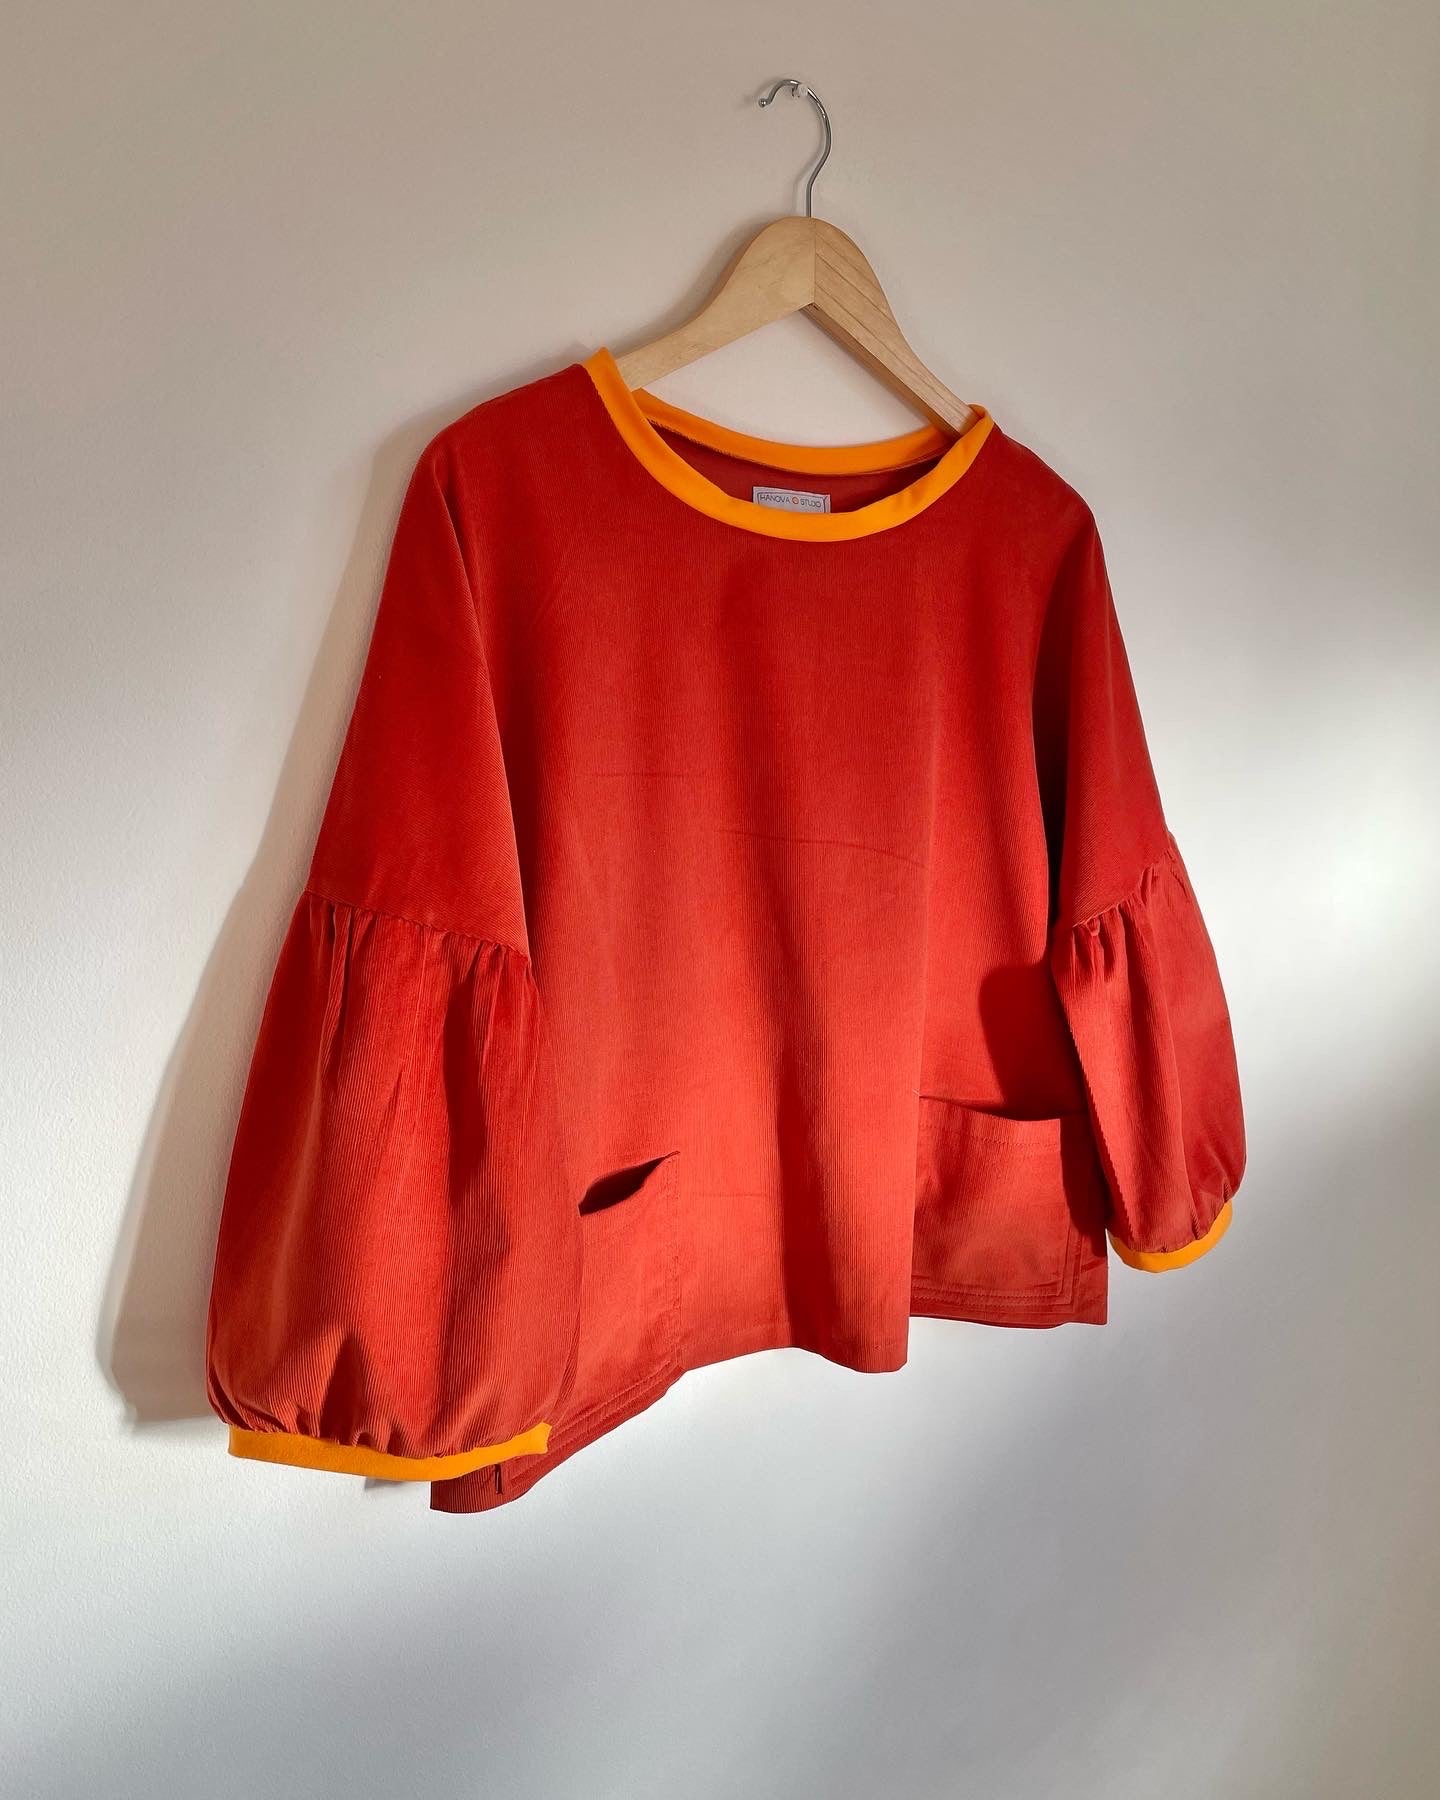 terracotta cord cloud blouse with orange neon trim on a hanger